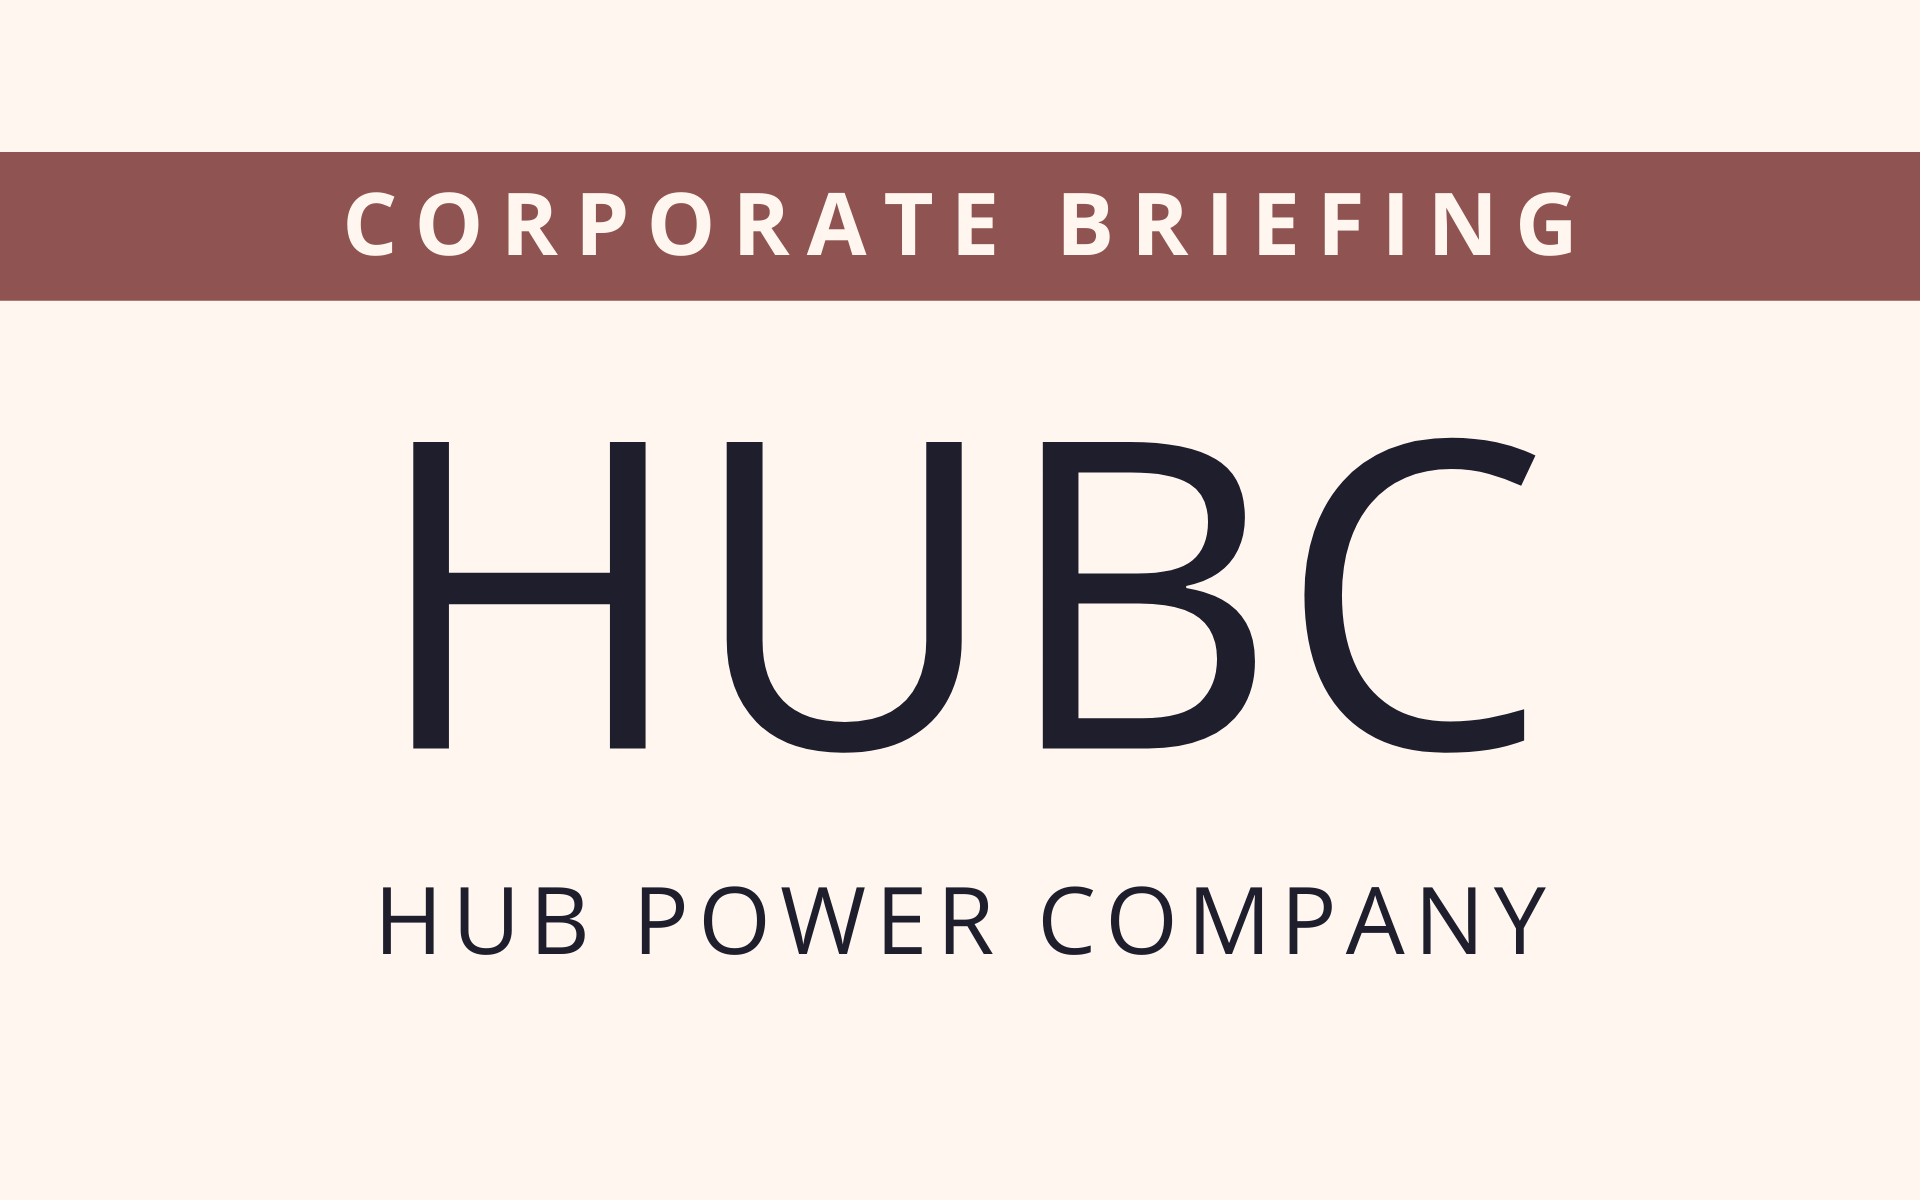 HUBC - Corporate Briefing